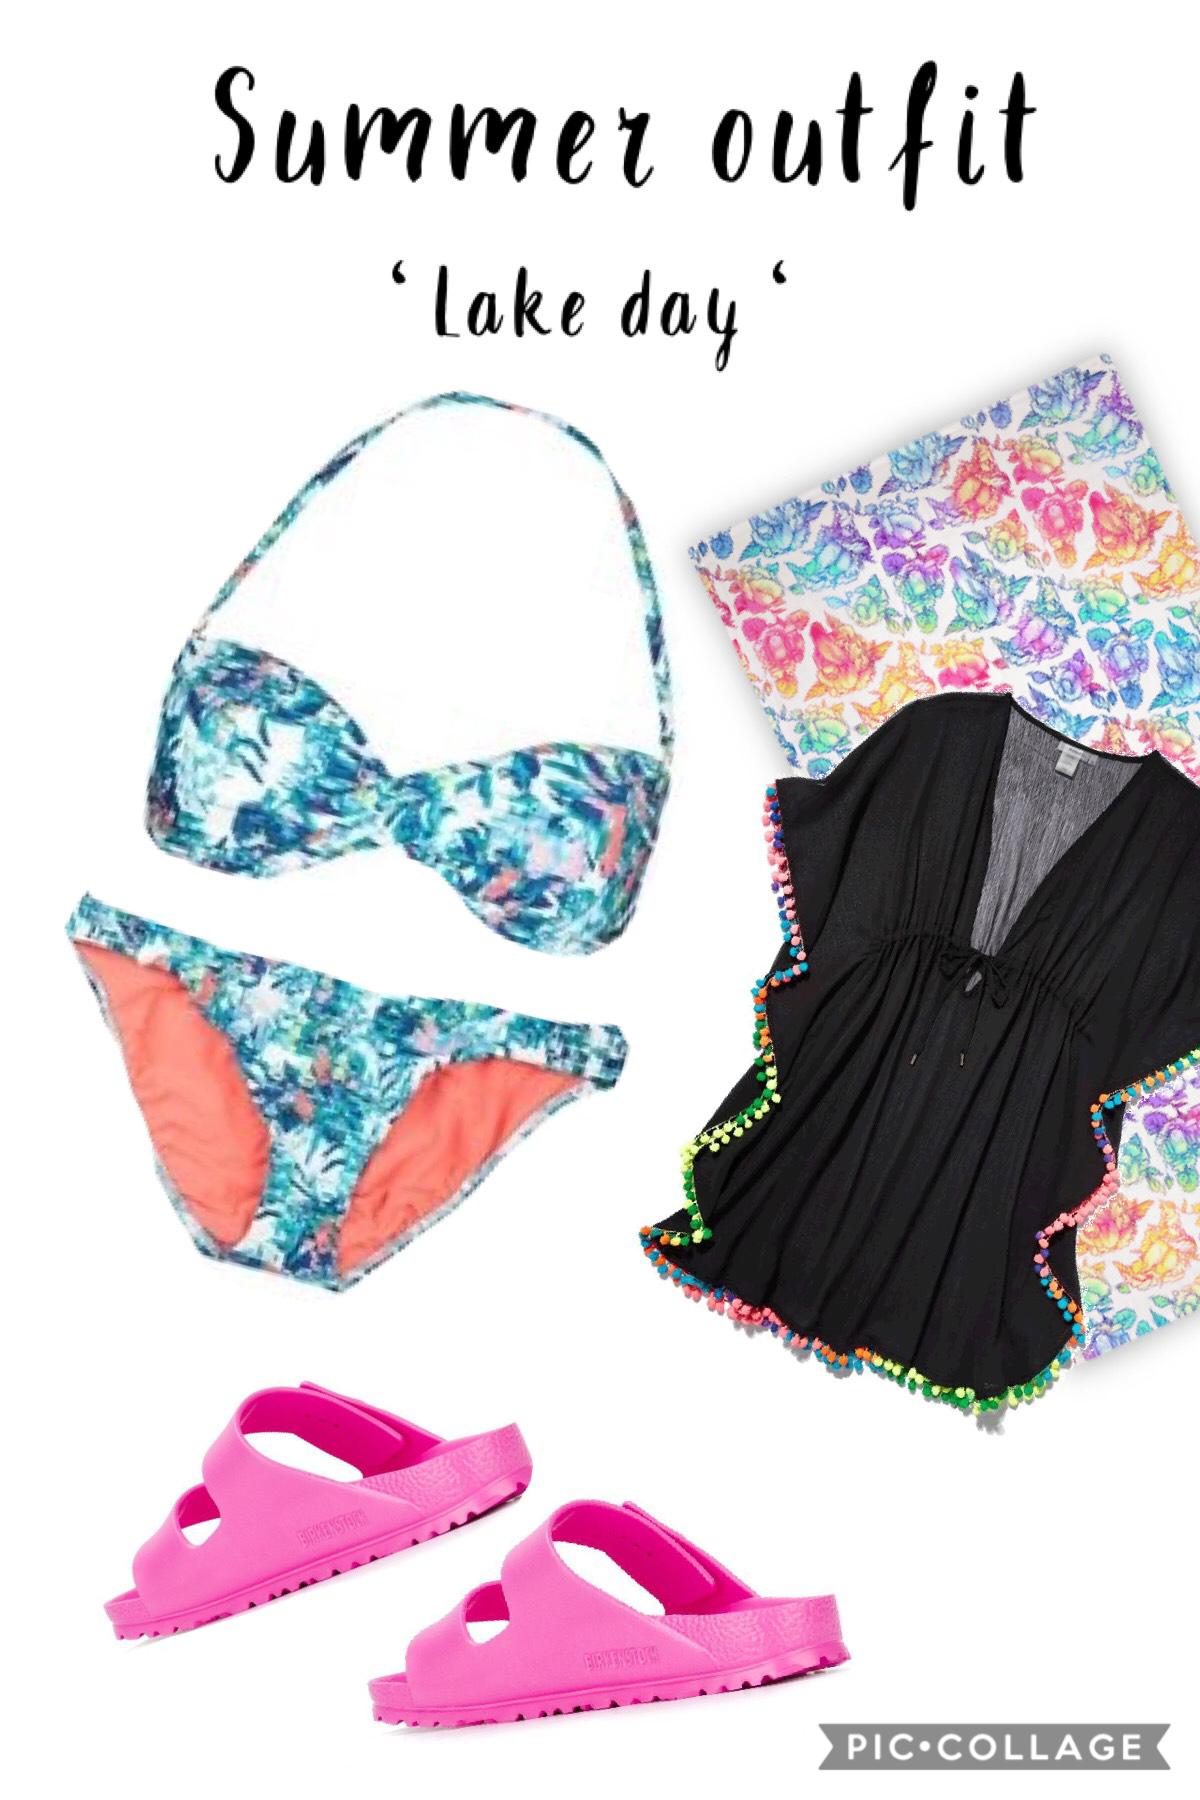 Another outfit collage! 👚 
Perfect for a lake day or heck, even a beach day!! I will take a break of outfits and do some Png packs and some bg packs too! Comment some theme for bg or png packs, and I’ll make and post them!💕💕